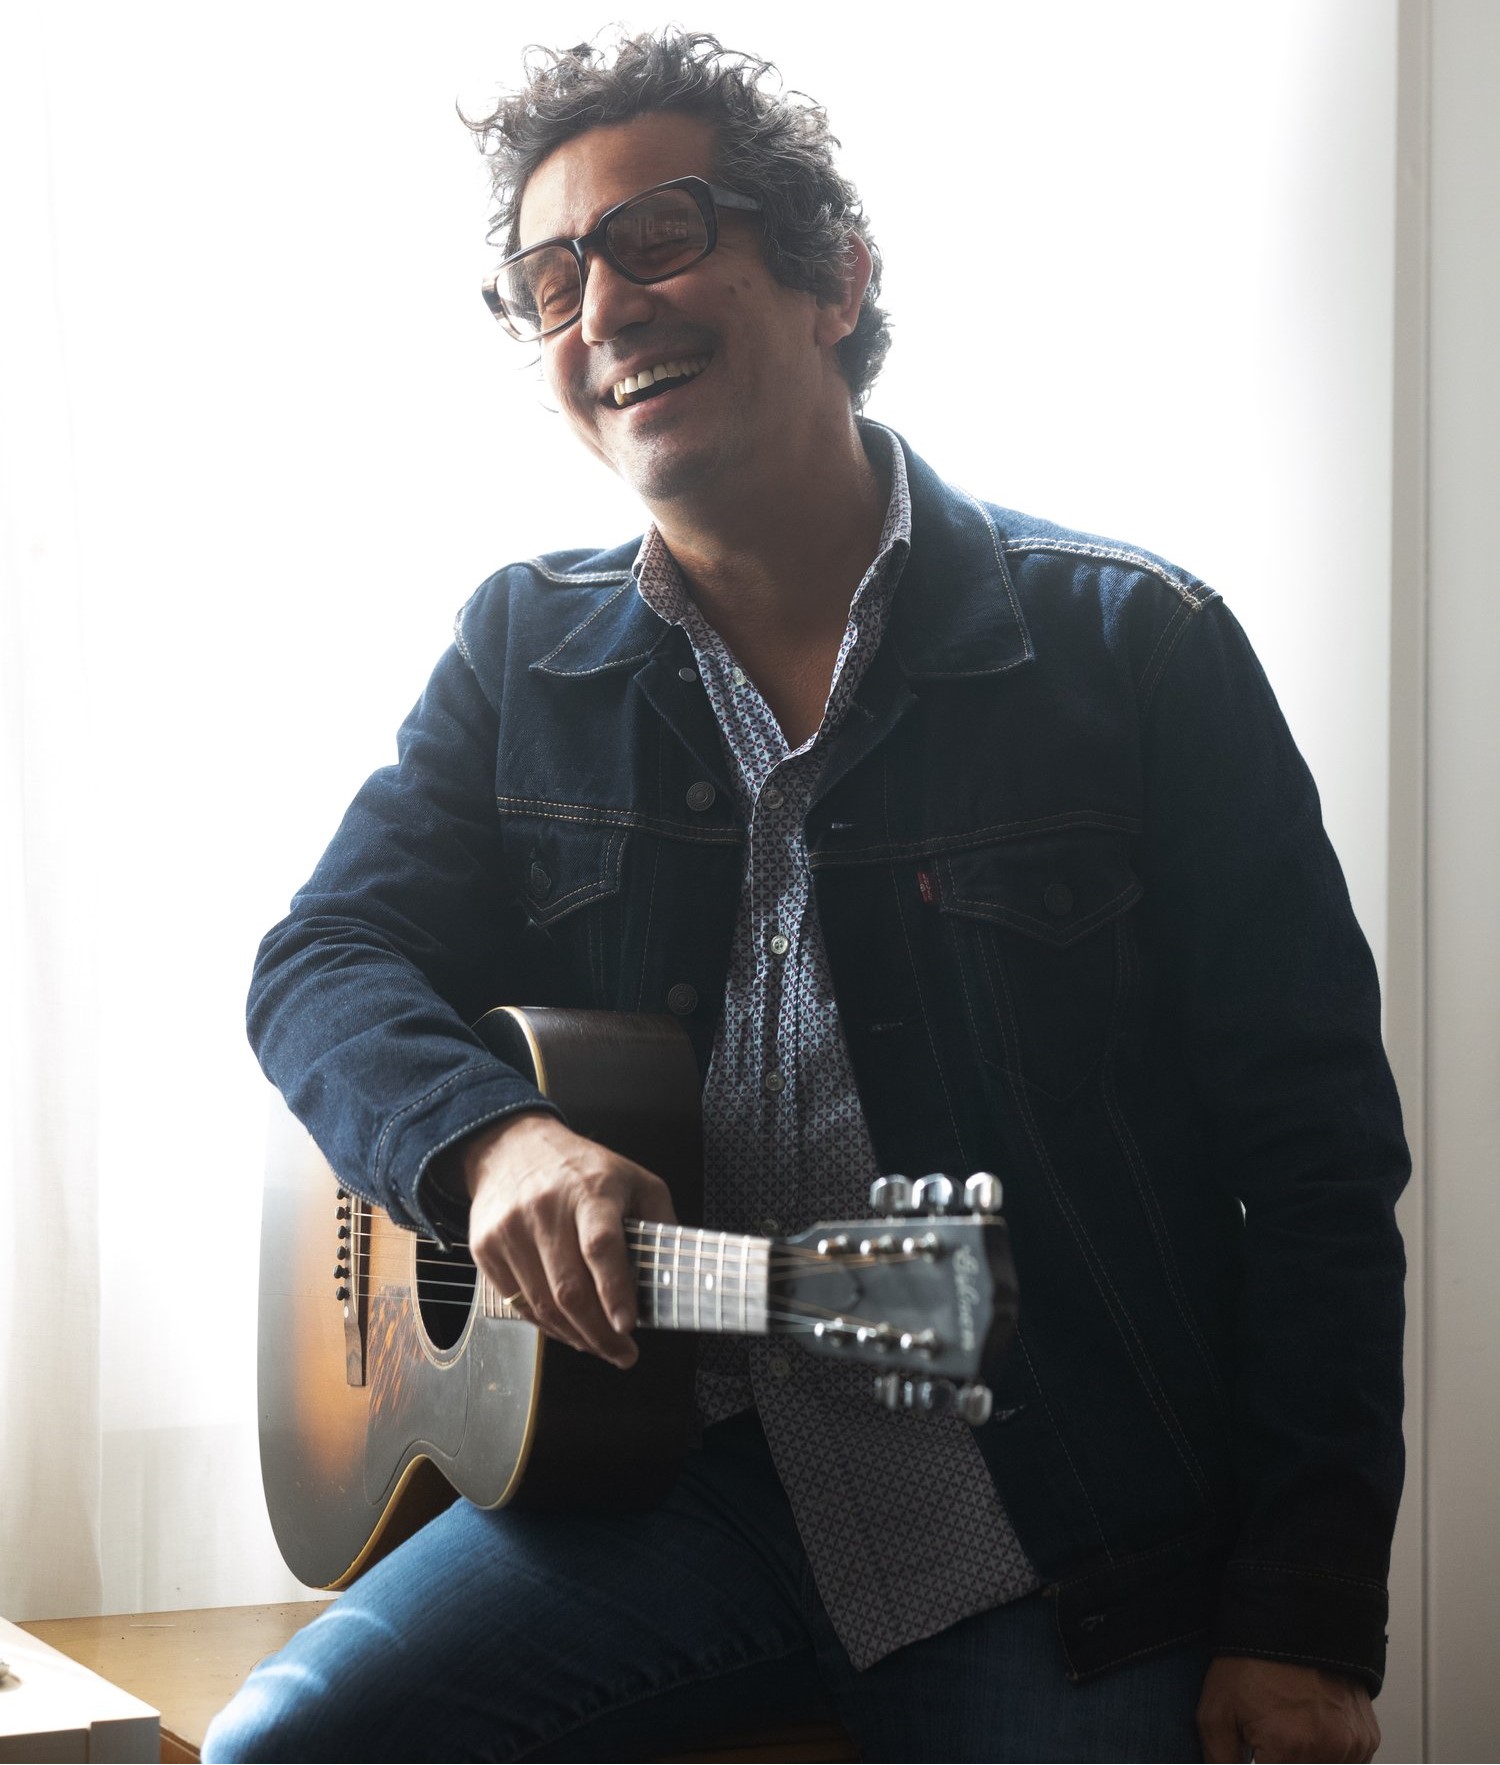 AJ Croce smiling and holding guitar